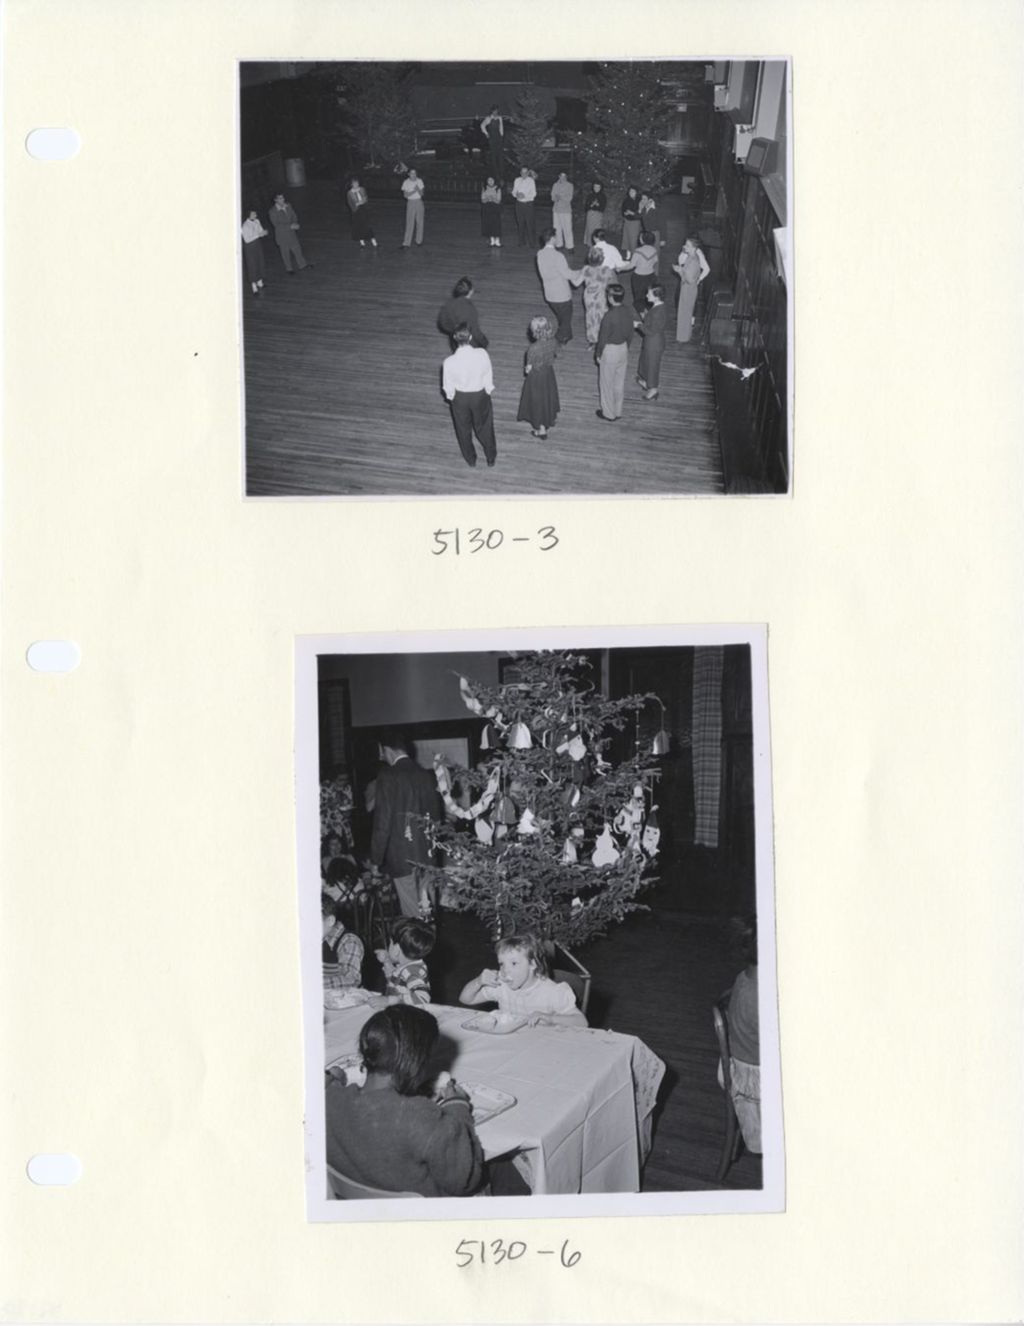 Miniature of (Top photo) Dancing at Hull-House Christmas party; (Bottom photo) Children eating at Hull-House Christmas party